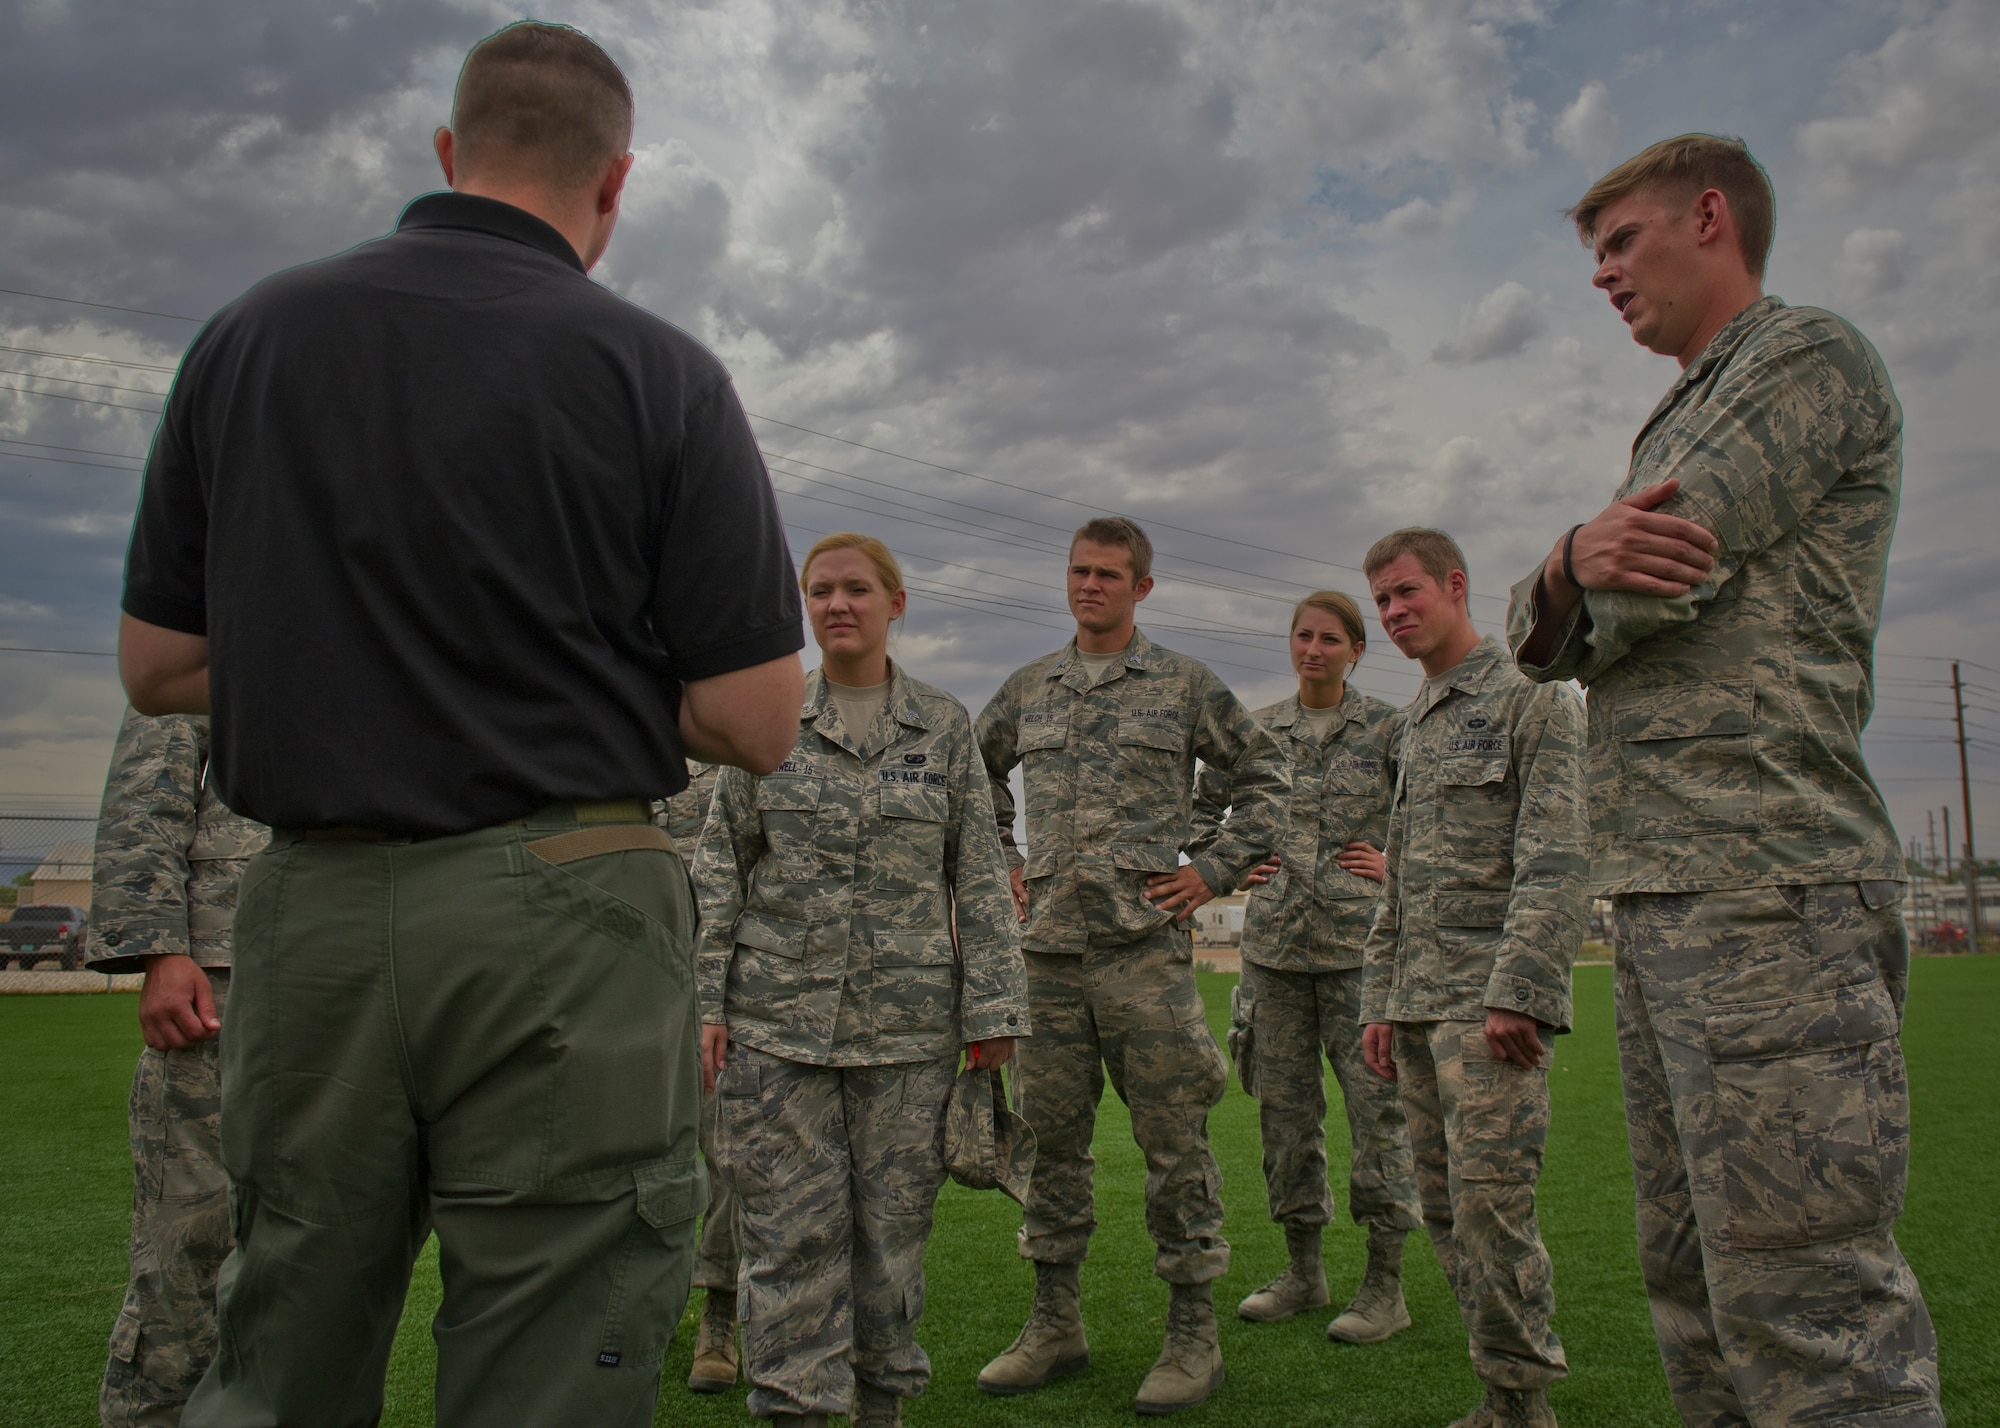 Staff Sgt. Zachary Burtt, 49th Security Forces Squadron Military Working Dog handler, briefs a group of U.S. Air Force Academy Cadets on safety procedures at Holloman Air Force Base, N.M., June 28. The cadets spent two weeks at Holloman to gain insight on their career options after the academy. (U.S. Air Force photo by Airman 1st Class Aaron Montoya/Released)